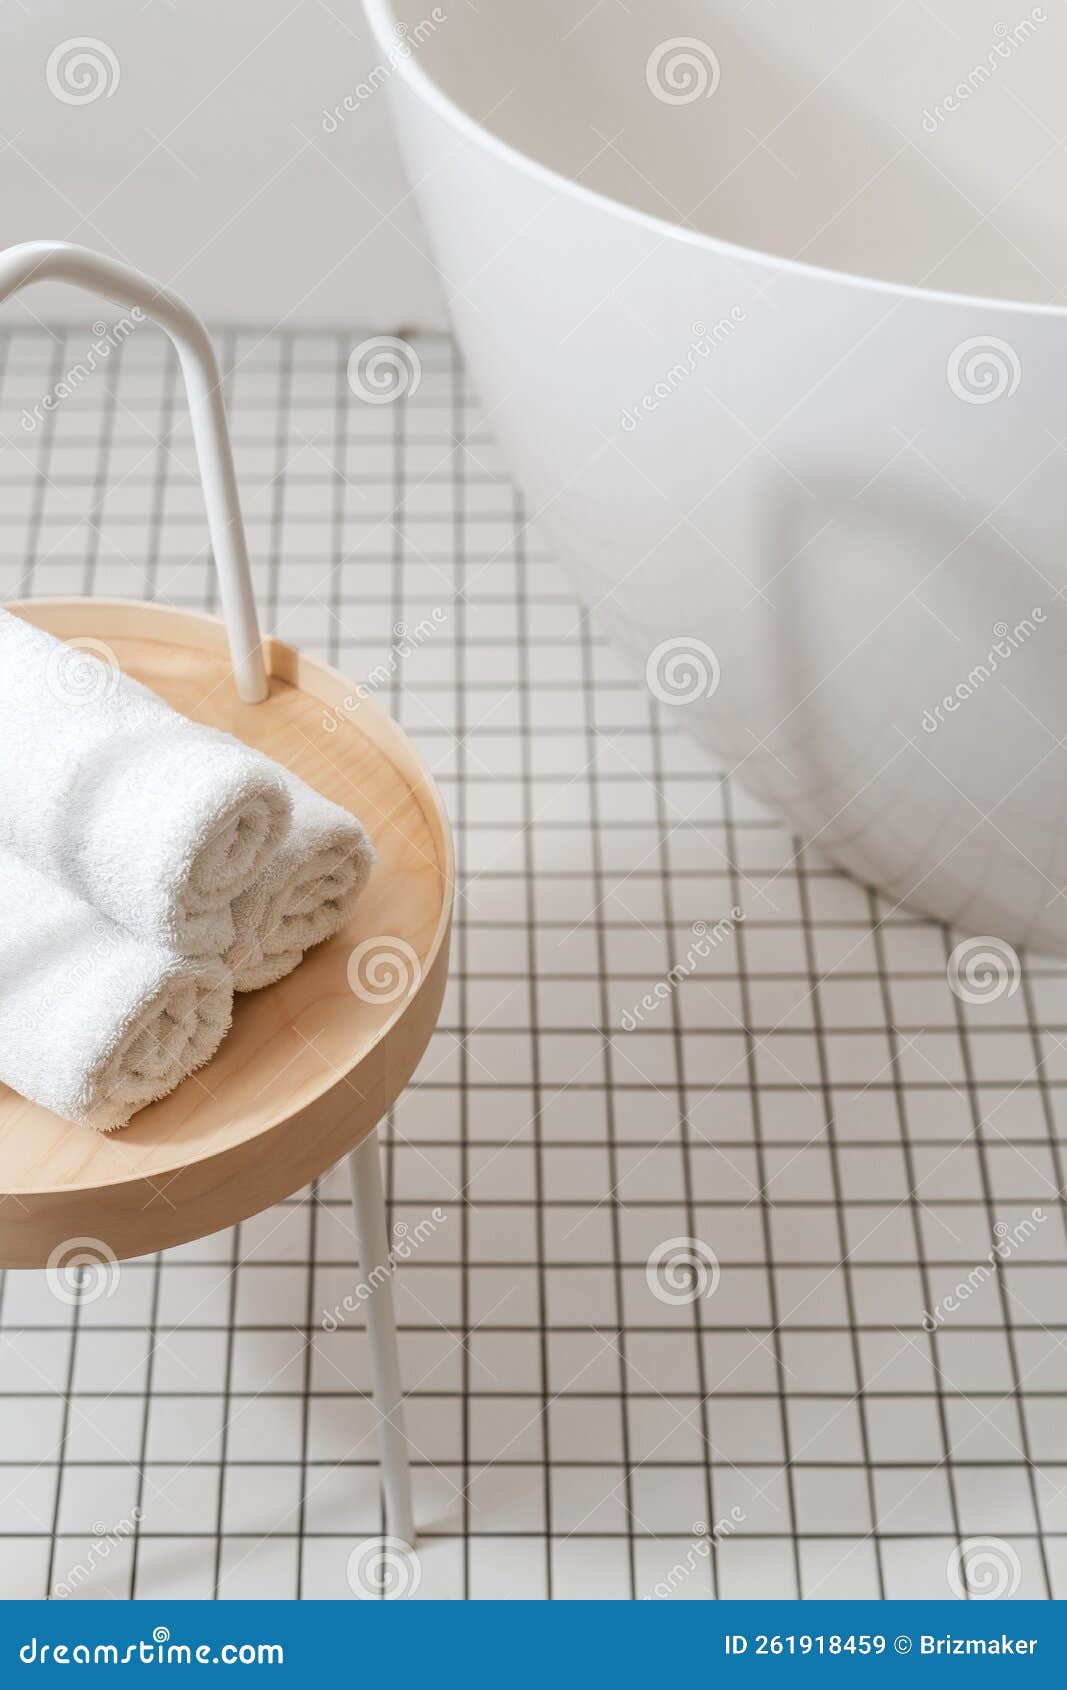 https://thumbs.dreamstime.com/z/clean-rolled-towels-bathroom-table-close-to-tub-concept-hygiene-face-body-towel-high-angle-view-cloth-folded-empty-261918459.jpg